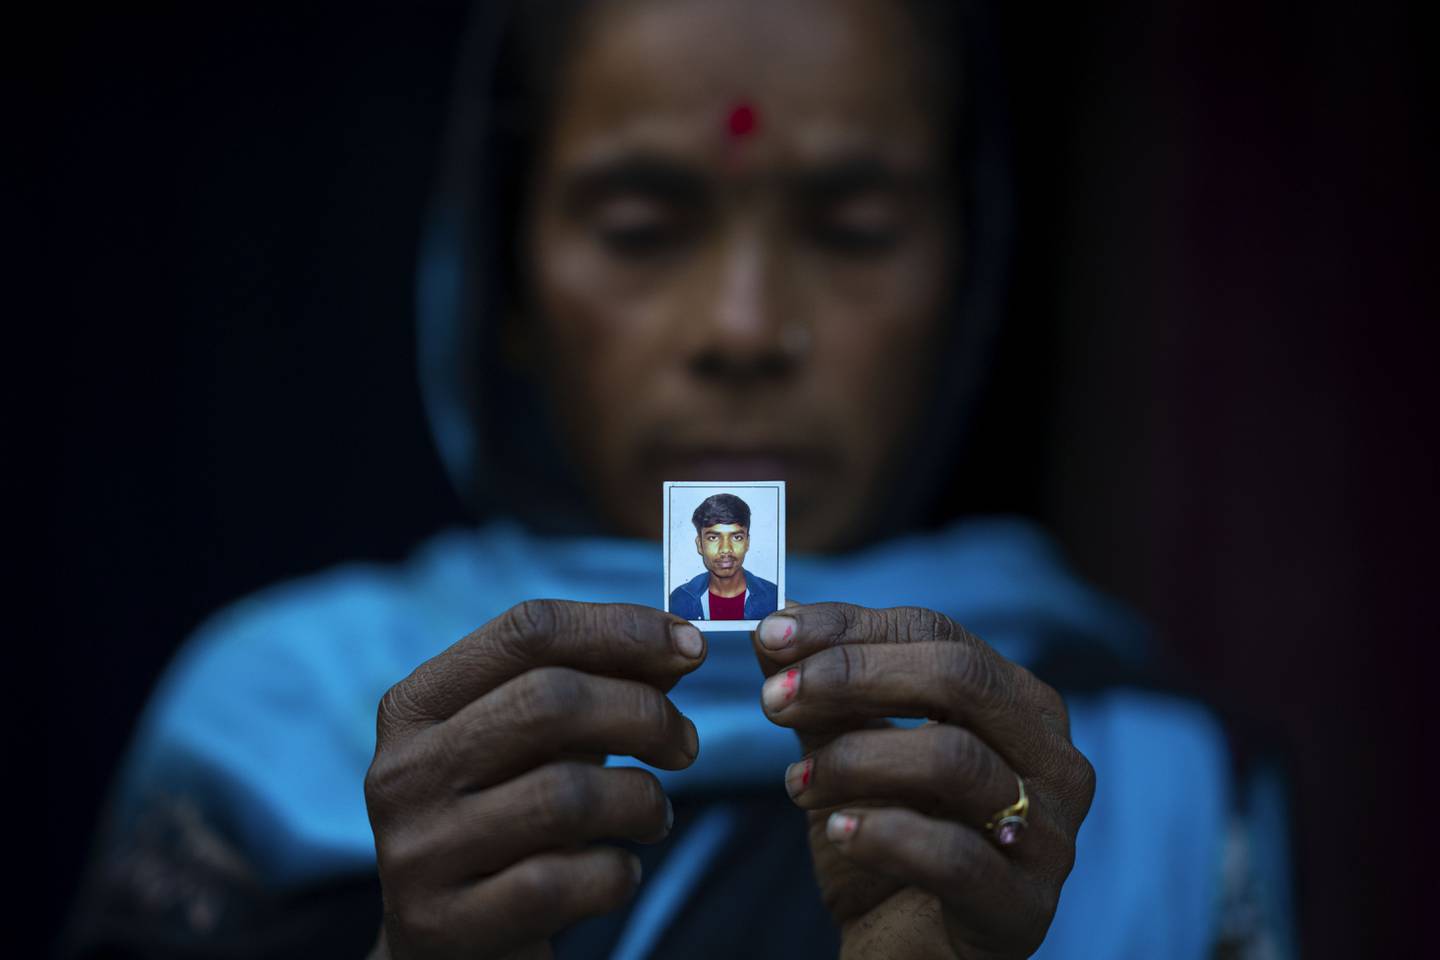 Radha Rani Mondal, 50, shows the photograph of her son, who was arrested by police in Morigaon district of Indian northeastern state of Assam, Friday, Feb. 10, 2023. Mondal's 20-year-old son was arrested on 4 February and her 17-year-old daughter-in-law is pregnant. She spent her last 500 rupees ($6 ) to hire a lawyer, whom she owes 20,000 rupees ($ 250 ) more. More than 3,000 men, including Hindu and Muslim priests, who were arrested nearly two weeks ago in the northeastern state of Assam under a wide crackdown on illegal child marriages involving girls under the age of 18. (AP Photo/Anupam Nath)